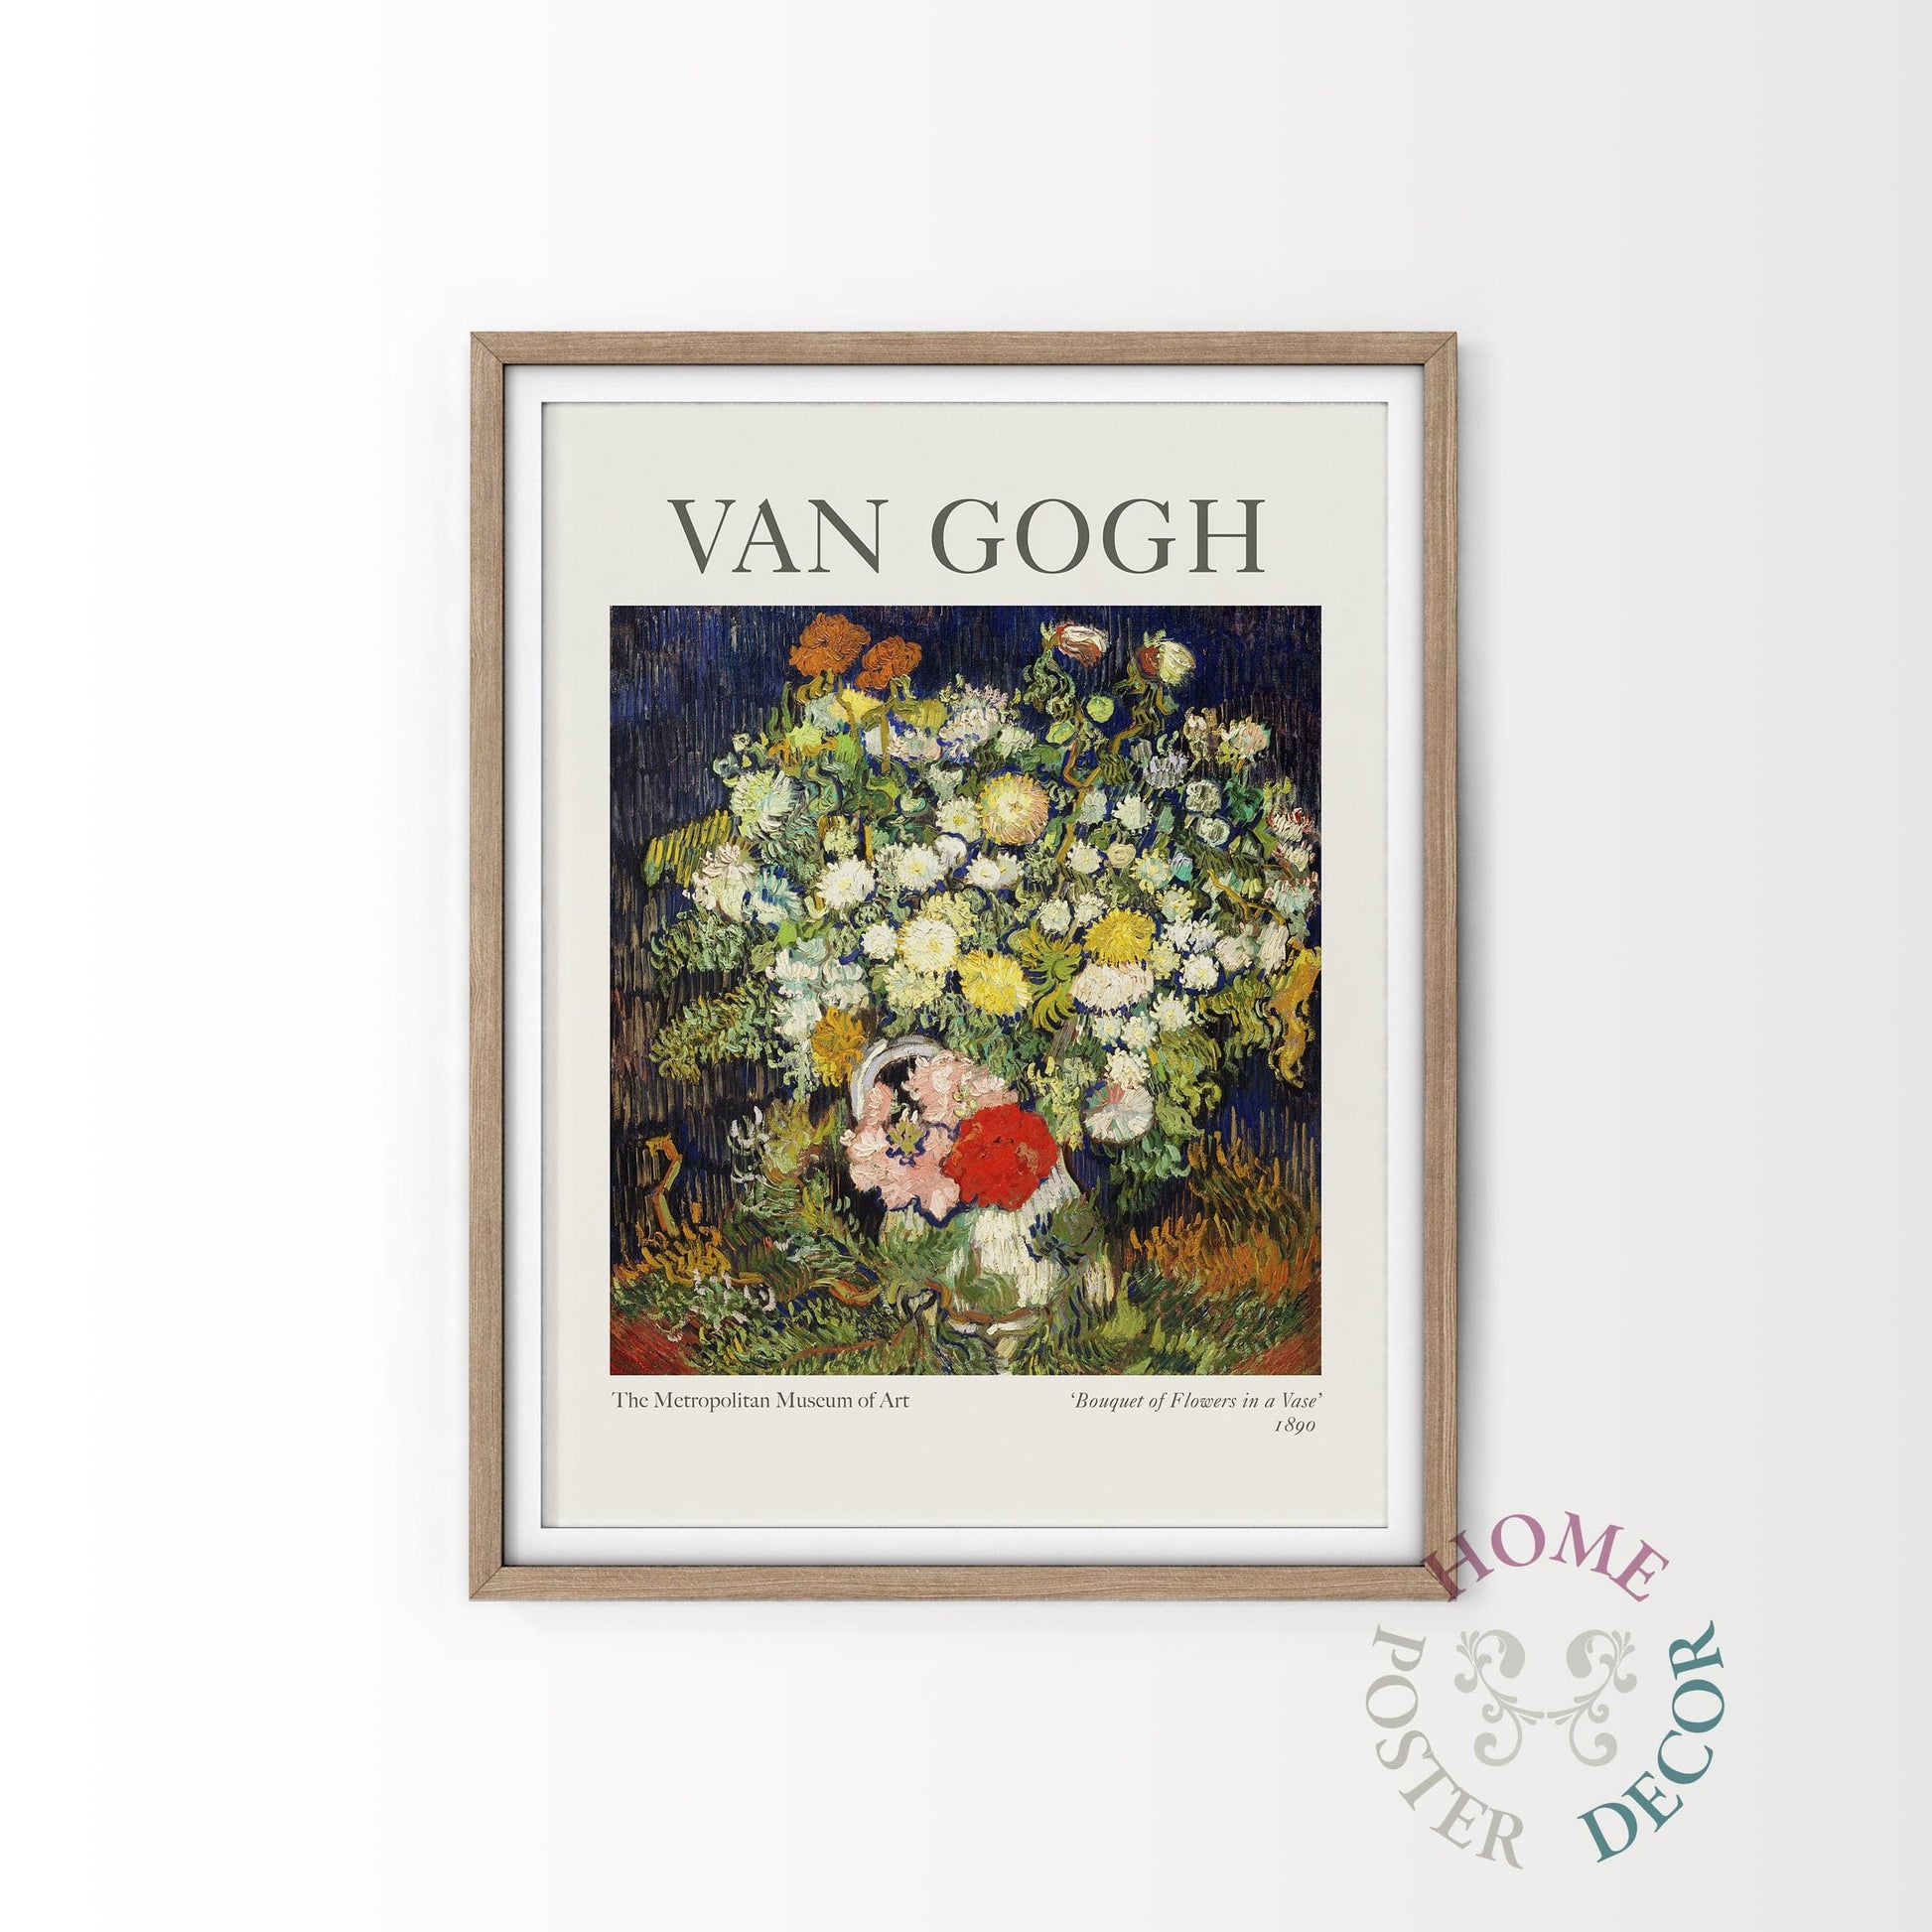 Home Poster Decor Single Van Gogh Poster, Bouquet of Flowers in a Vase, Anniversary Gift